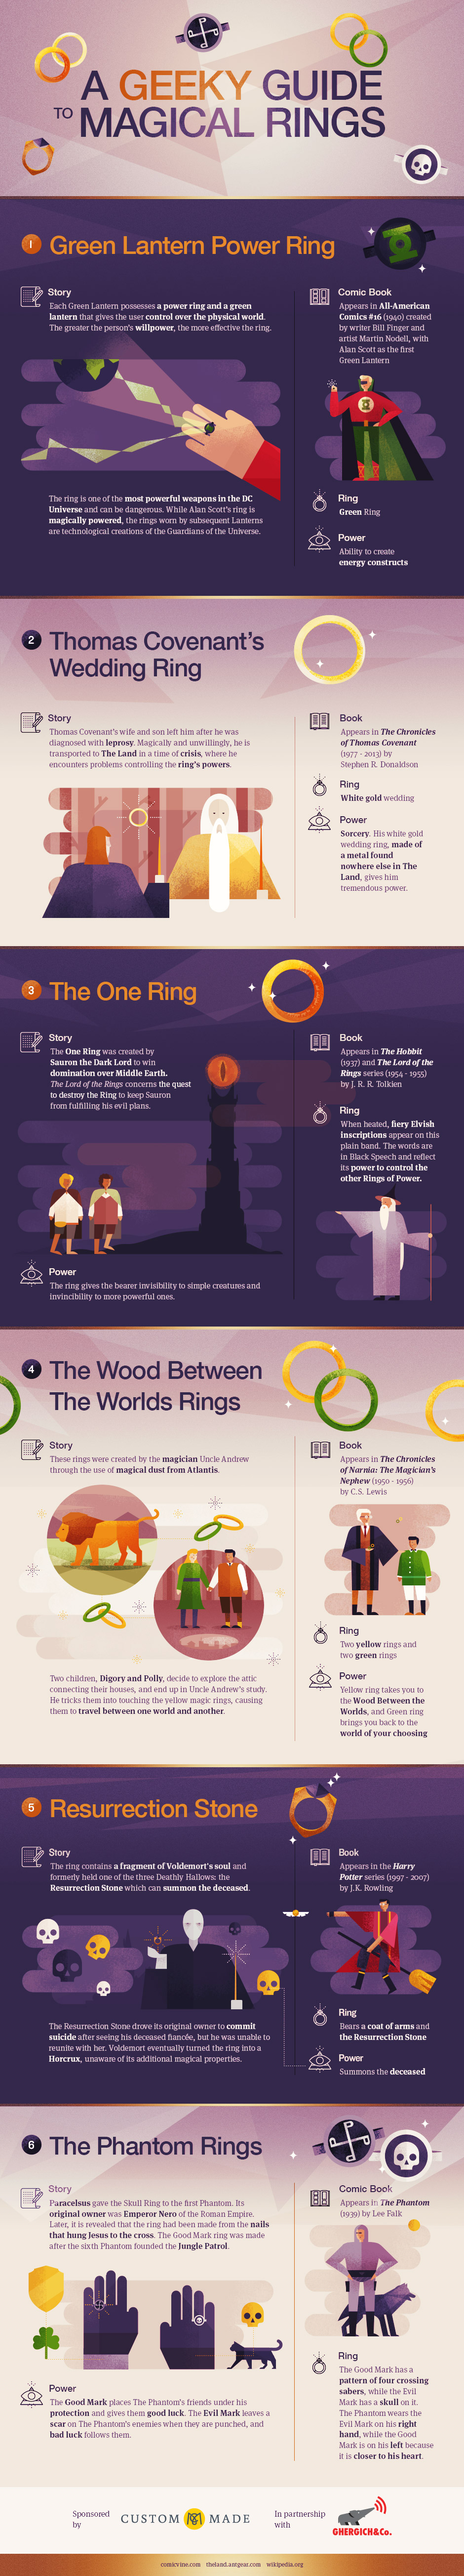 Geeky Guide to Magical Rings